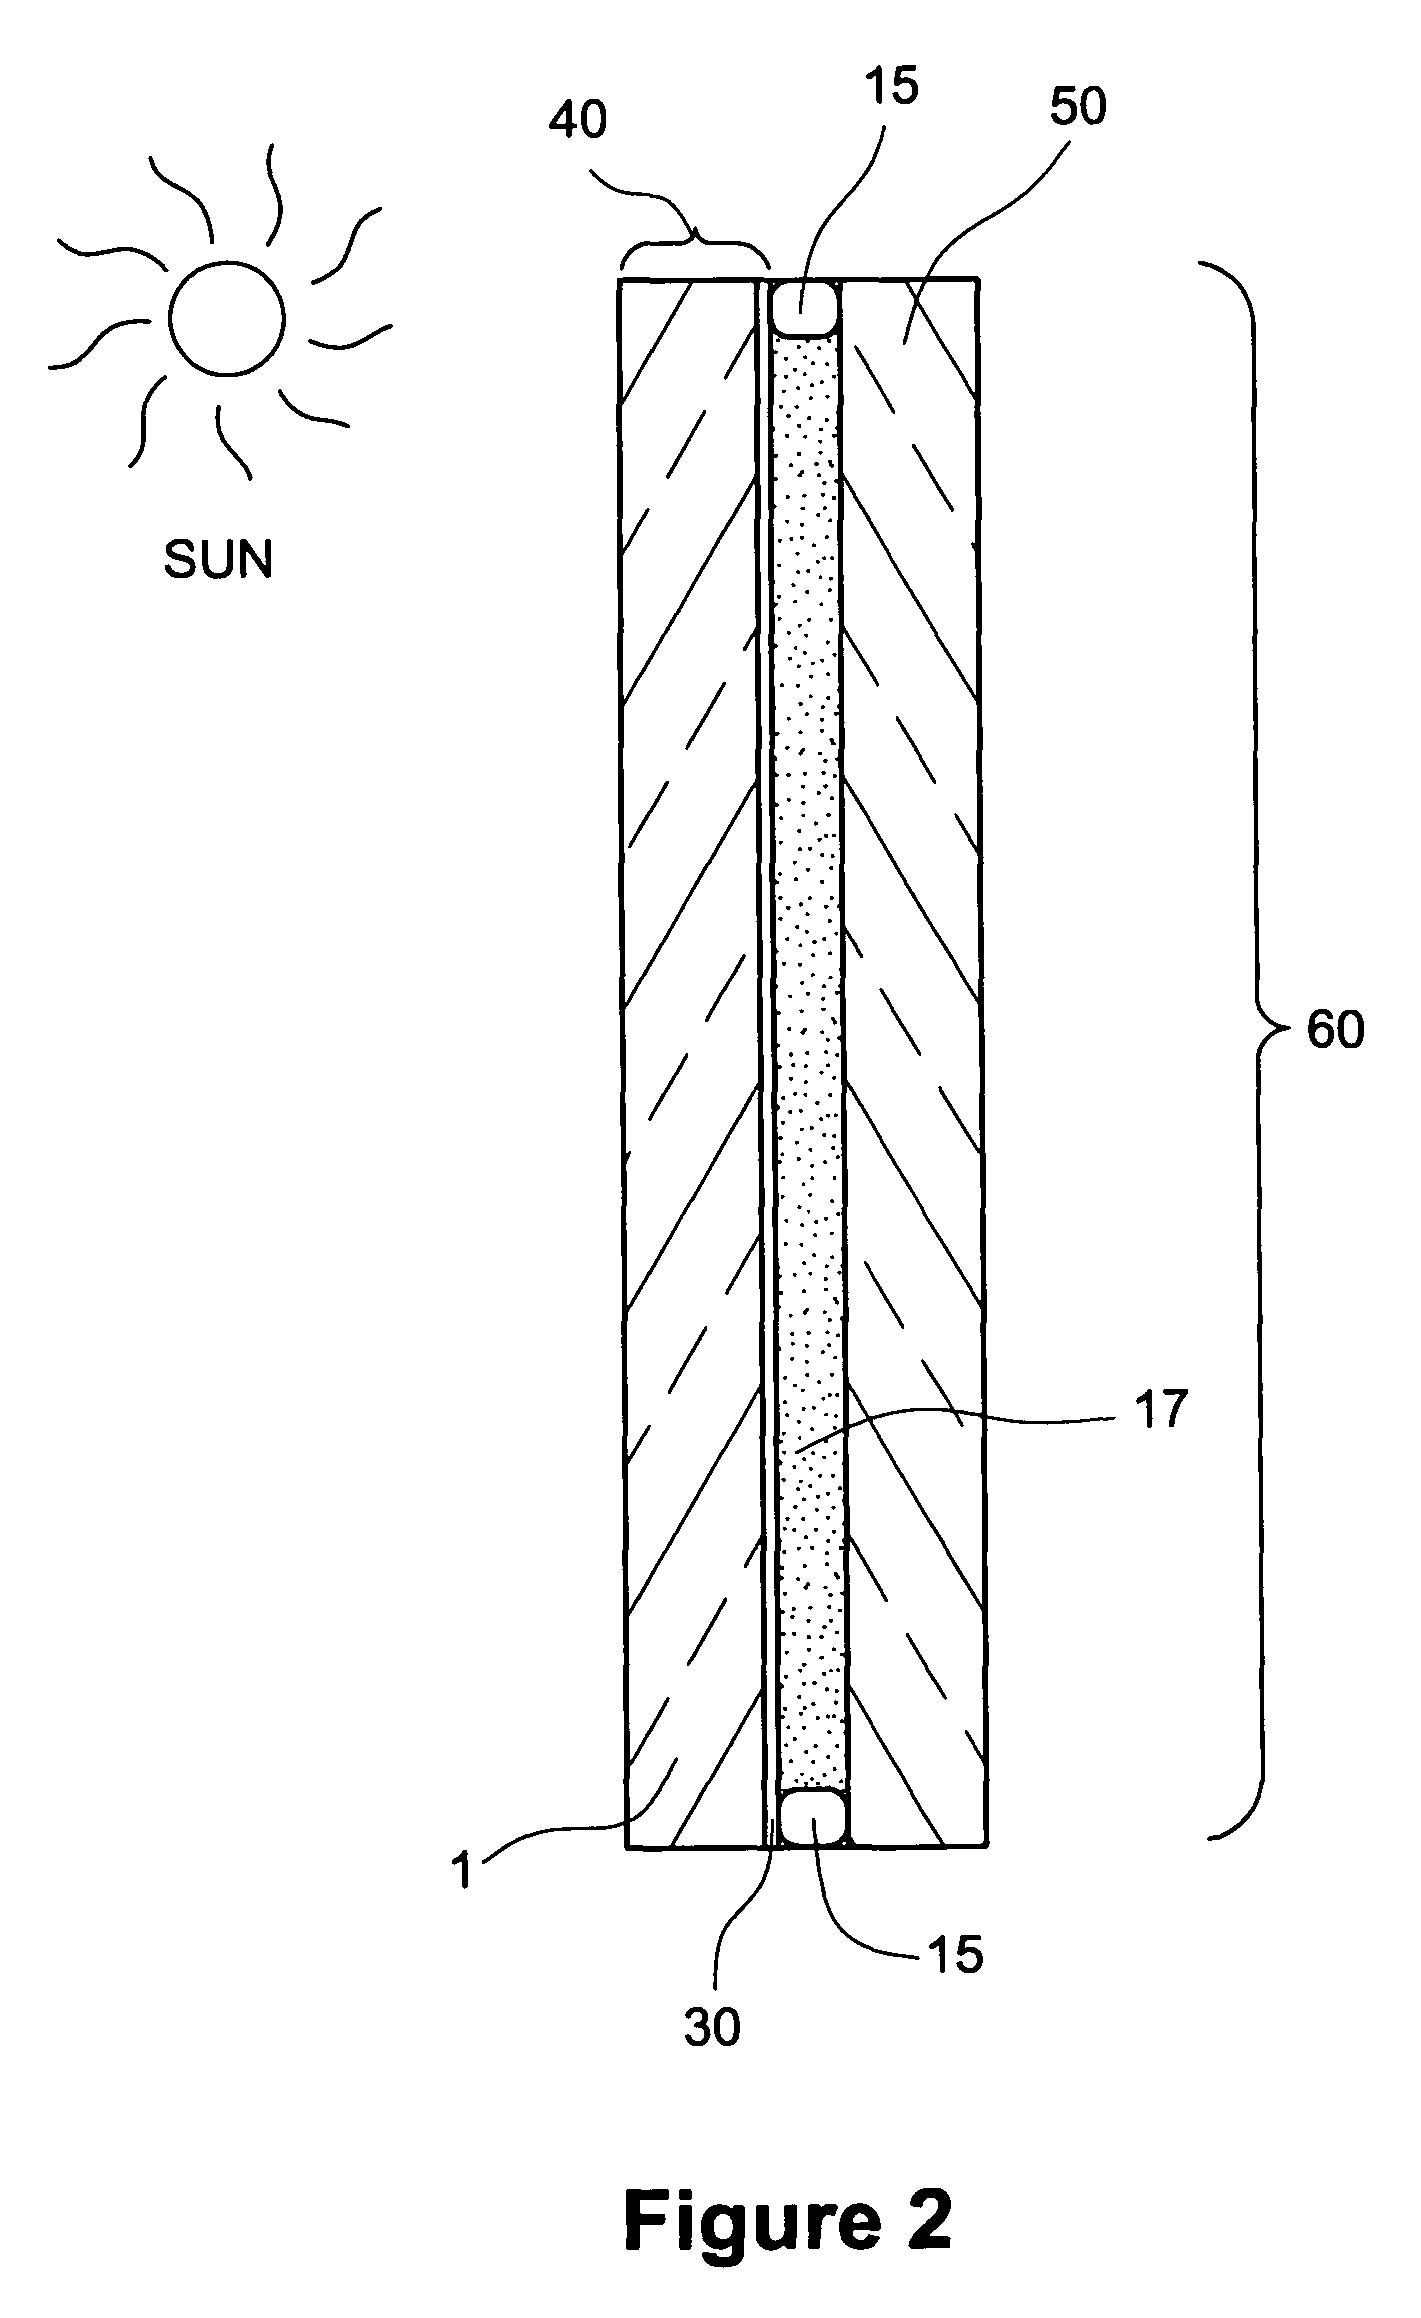 Coated article having low-E coating with absorber layer(s)